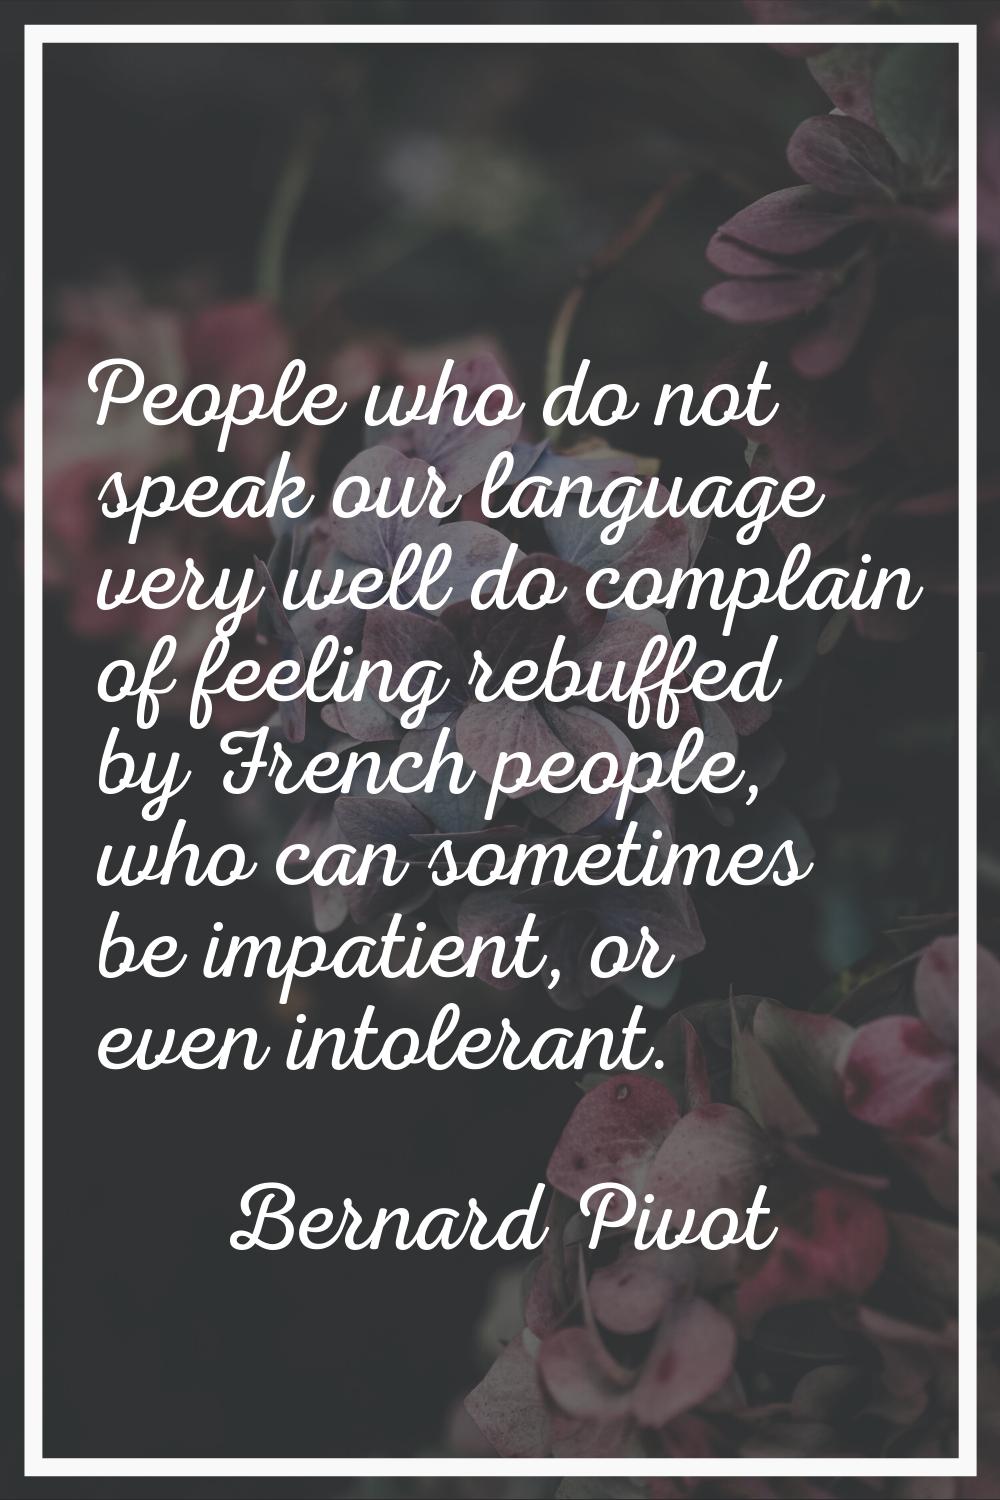 People who do not speak our language very well do complain of feeling rebuffed by French people, wh